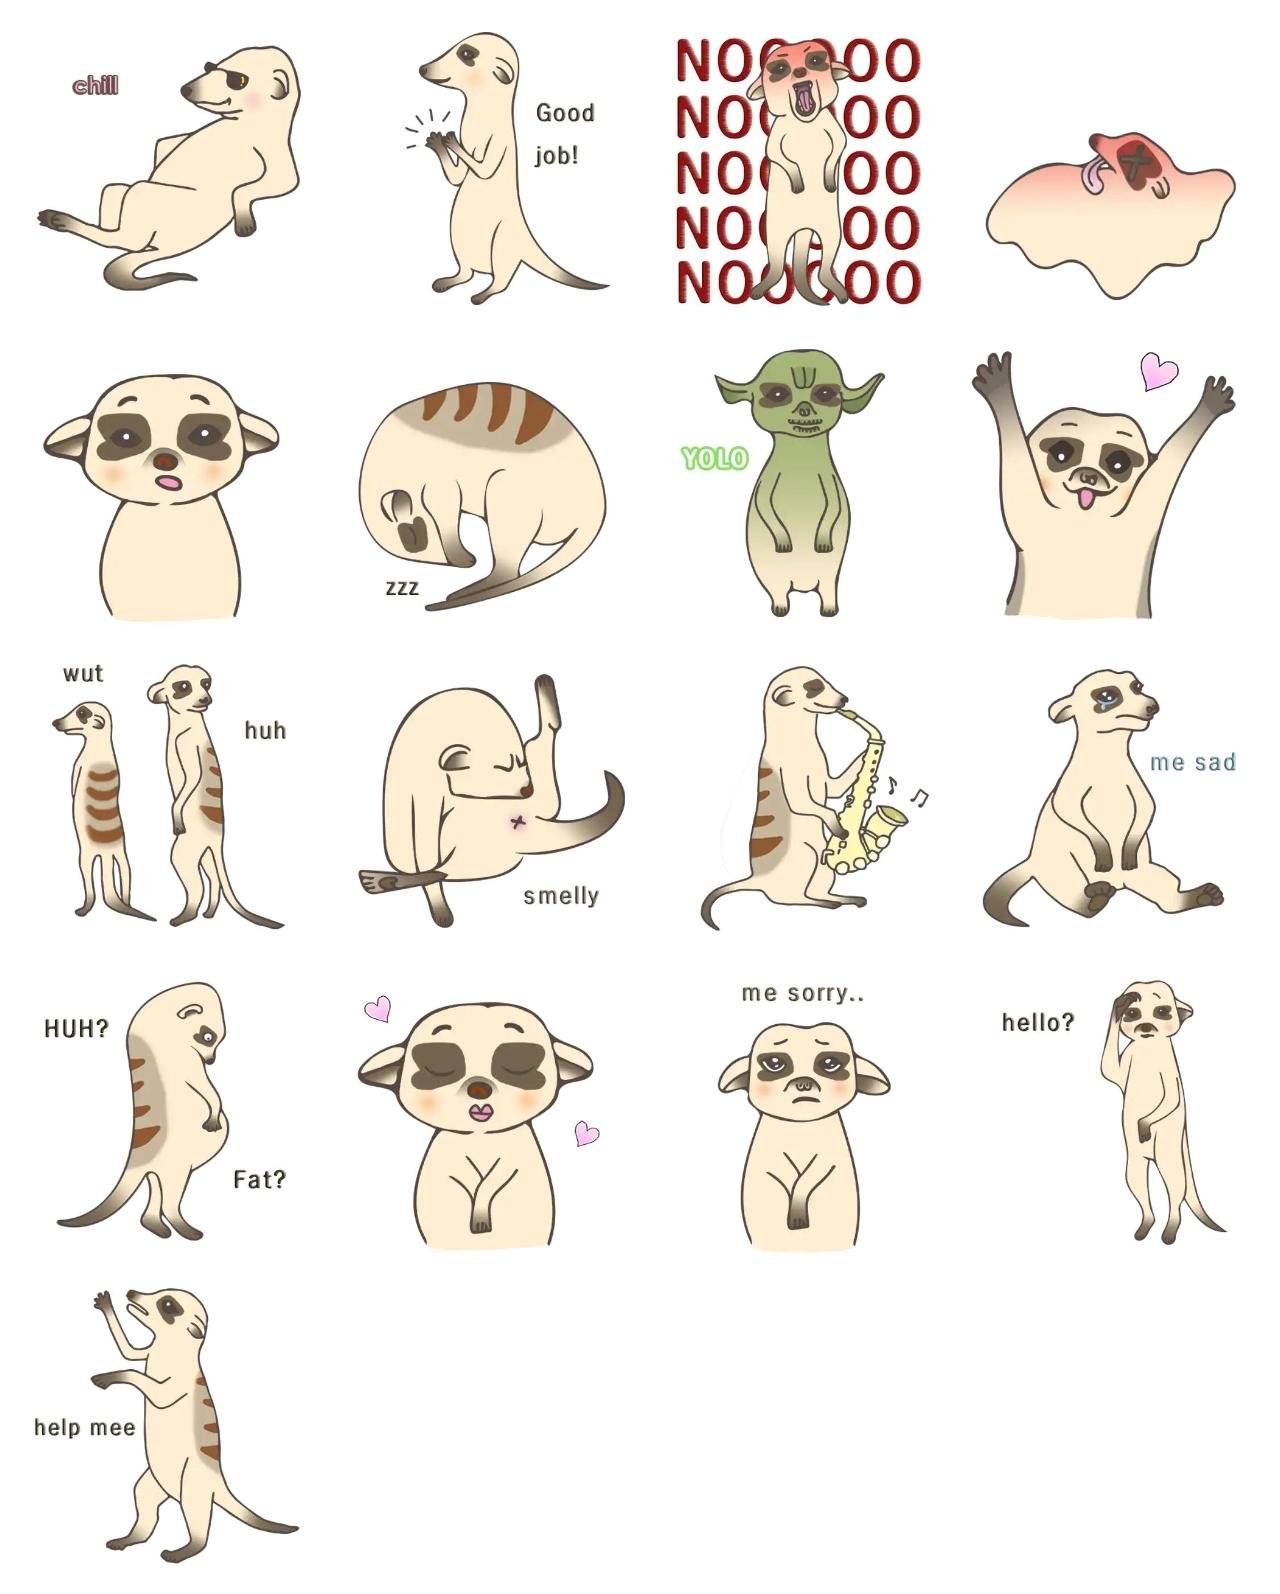 Meerkat Animals,Etc. sticker pack for Whatsapp, Telegram, Signal, and others chatting and message apps